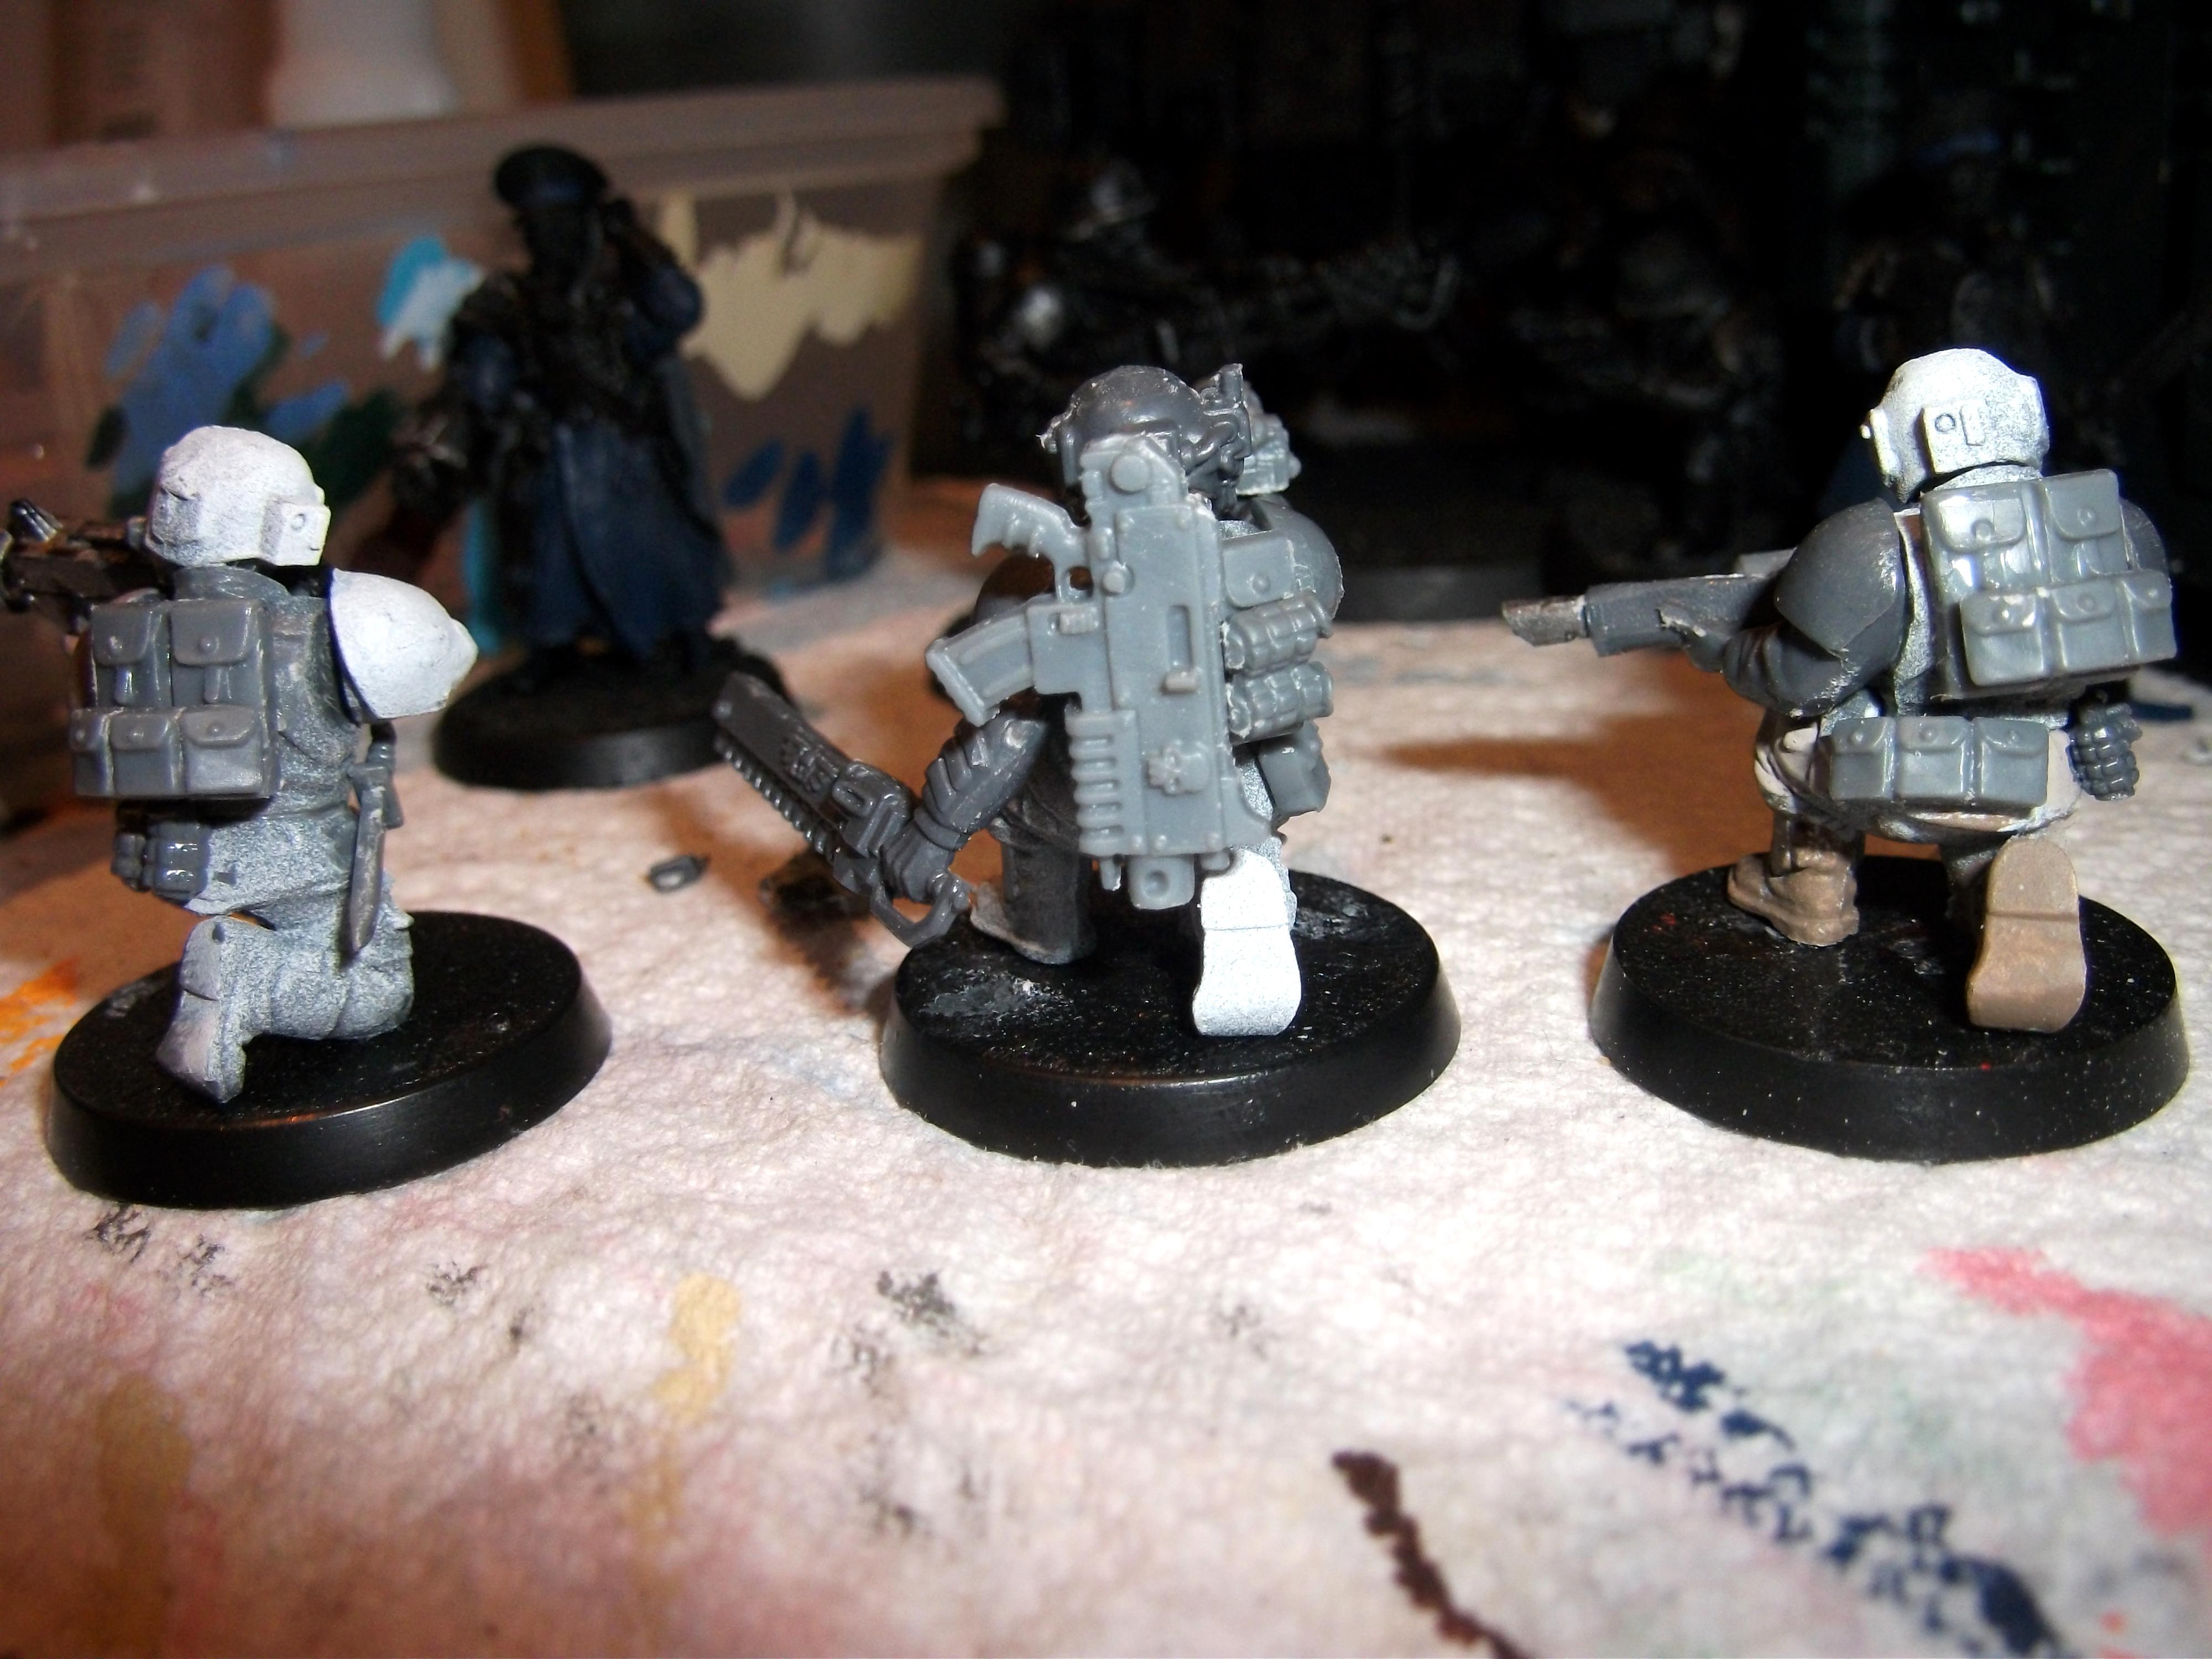 Backpacks, Conversion, Gasmasks, Goggles, Imperial Guard, Storm Troopers